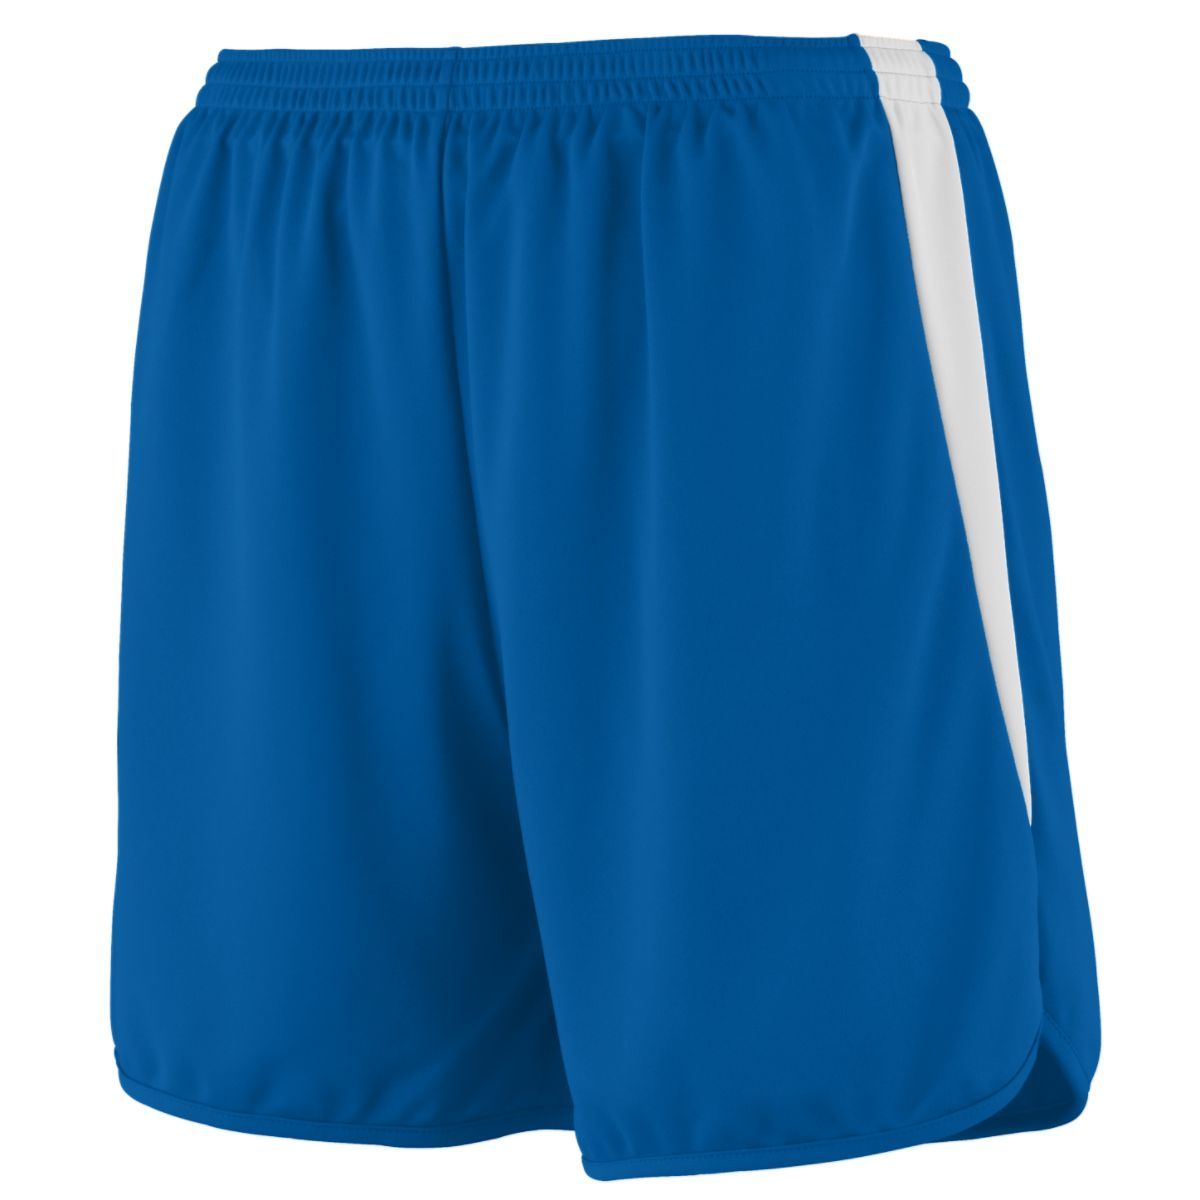 Augusta Sportswear Rapidpace Track Shorts in Royal/White  -Part of the Adult, Adult-Shorts, Augusta-Products, Track-Field product lines at KanaleyCreations.com